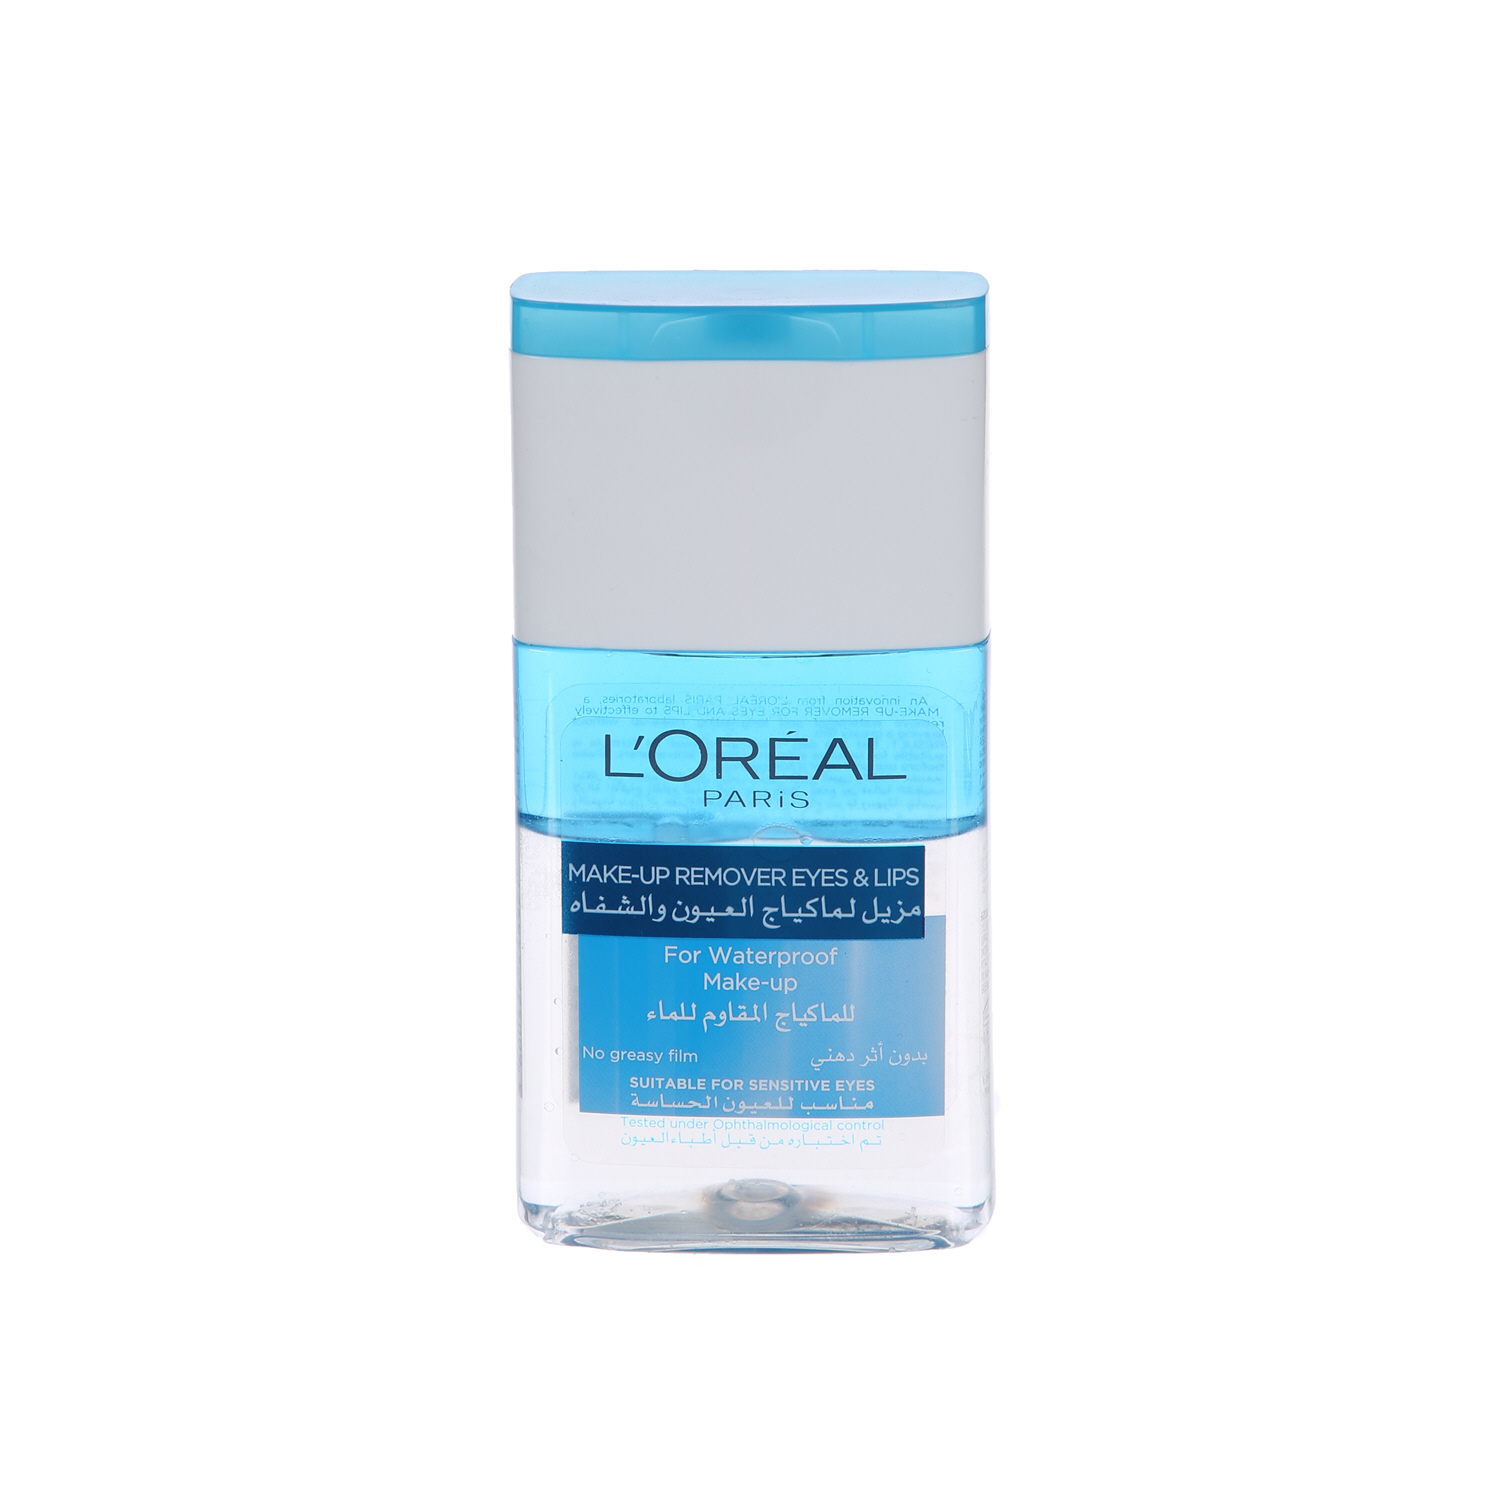 L'Oreal Gentle Makeup Remover 125ml